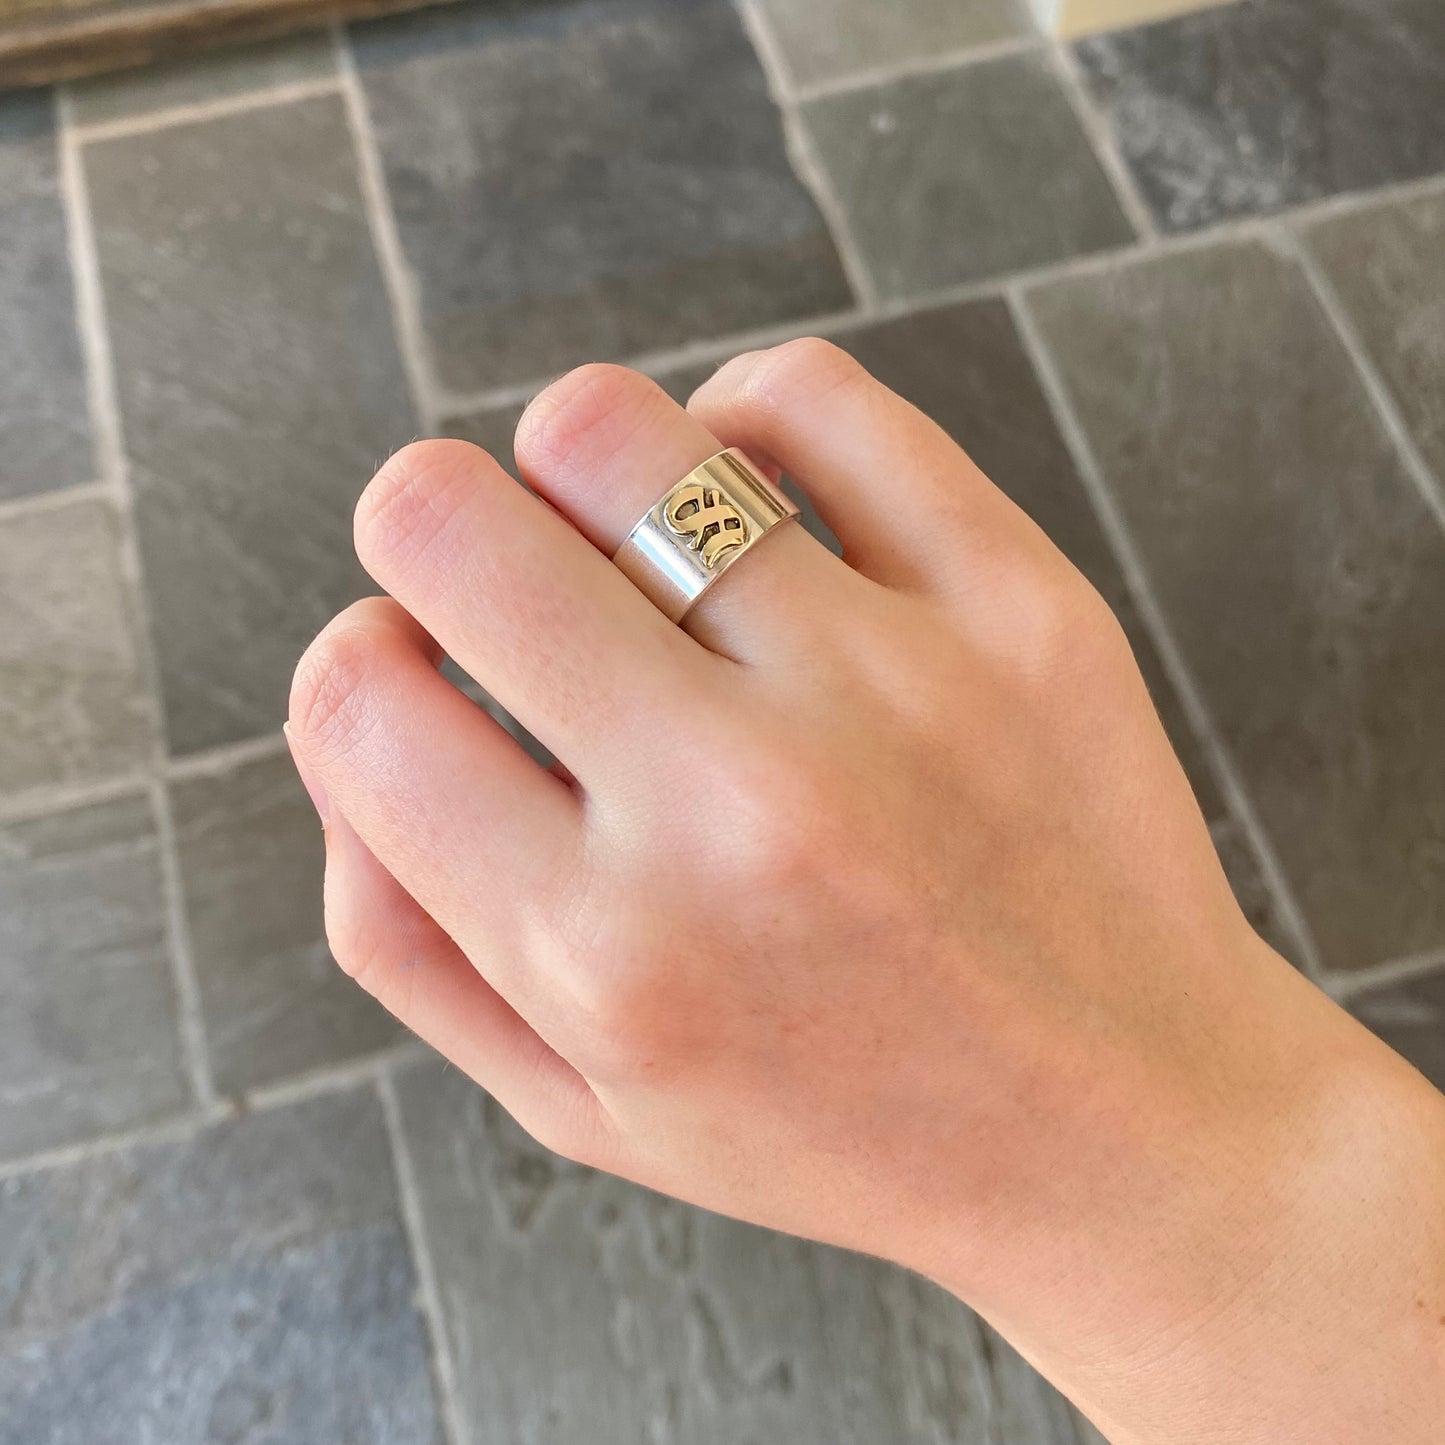 Silver Band with Gold Initial "S" Ring